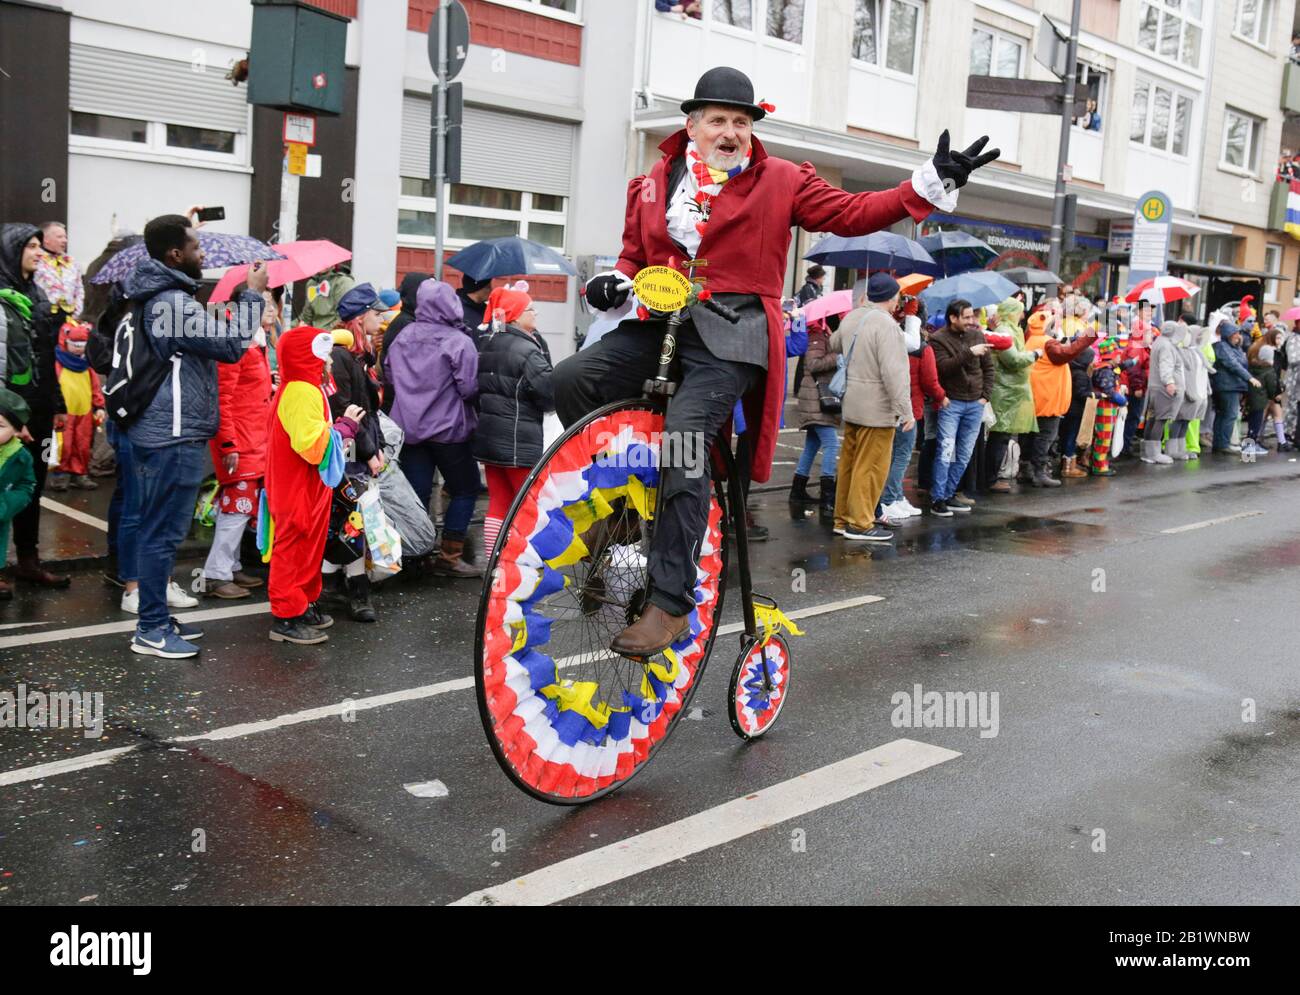 Mainz, Germany. 24th February 2020. A member of the Bicycle-Club Opel 1888 Ruesselsheim takes part in the the Mainz Rose Monday parade on a penny-farthing. Around half a million people lined the streets of Mainz for the traditional Rose Monday Carnival Parade. The 9 km long parade with over 9,000 participants is one of the three large Rose Monday Parades in Germany. Stock Photo